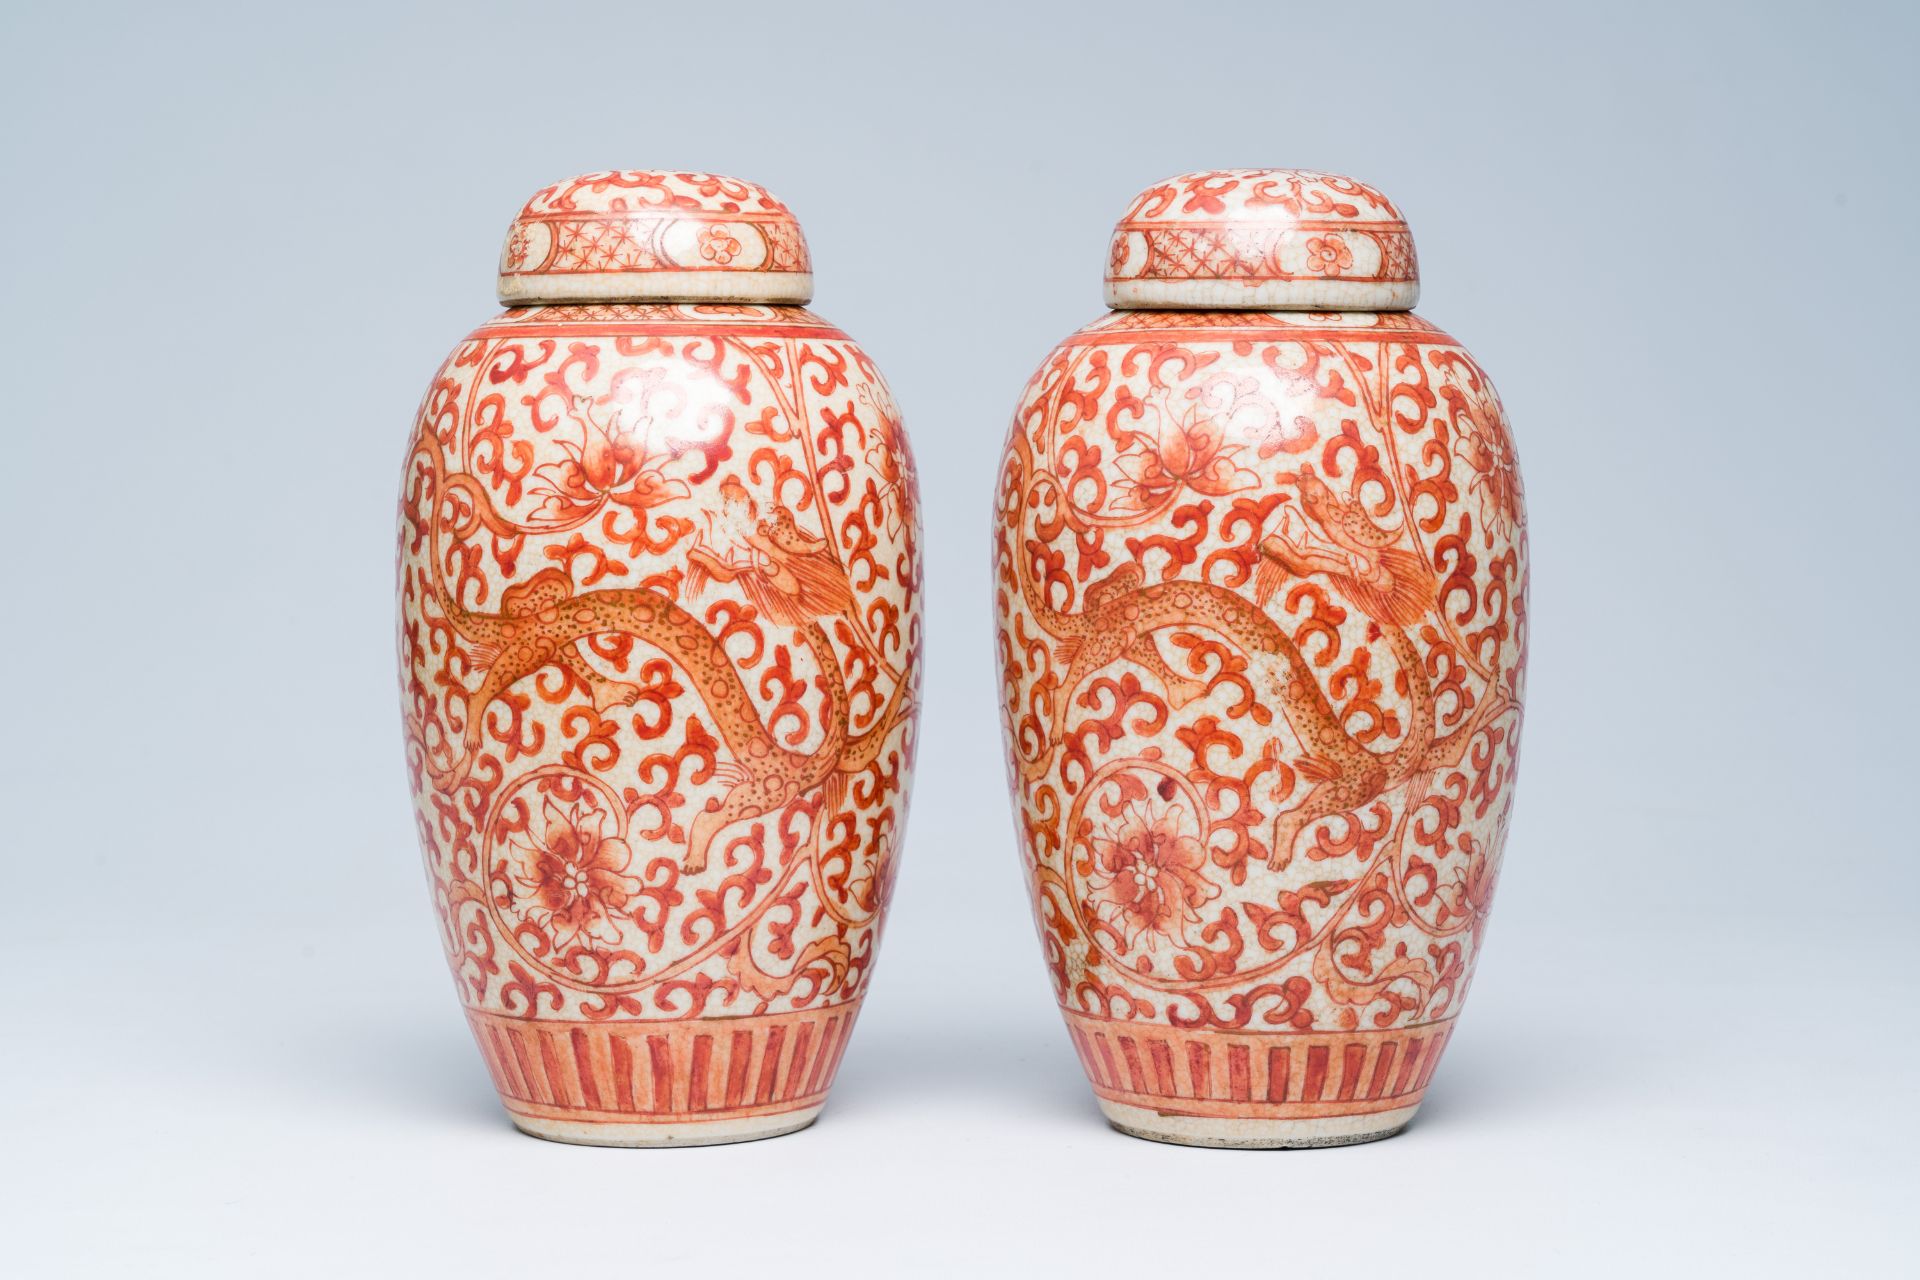 A pair of Chinese crackle glazed iron-red jars and covers with dragons among lotus scrolls, 19th C. - Image 3 of 6